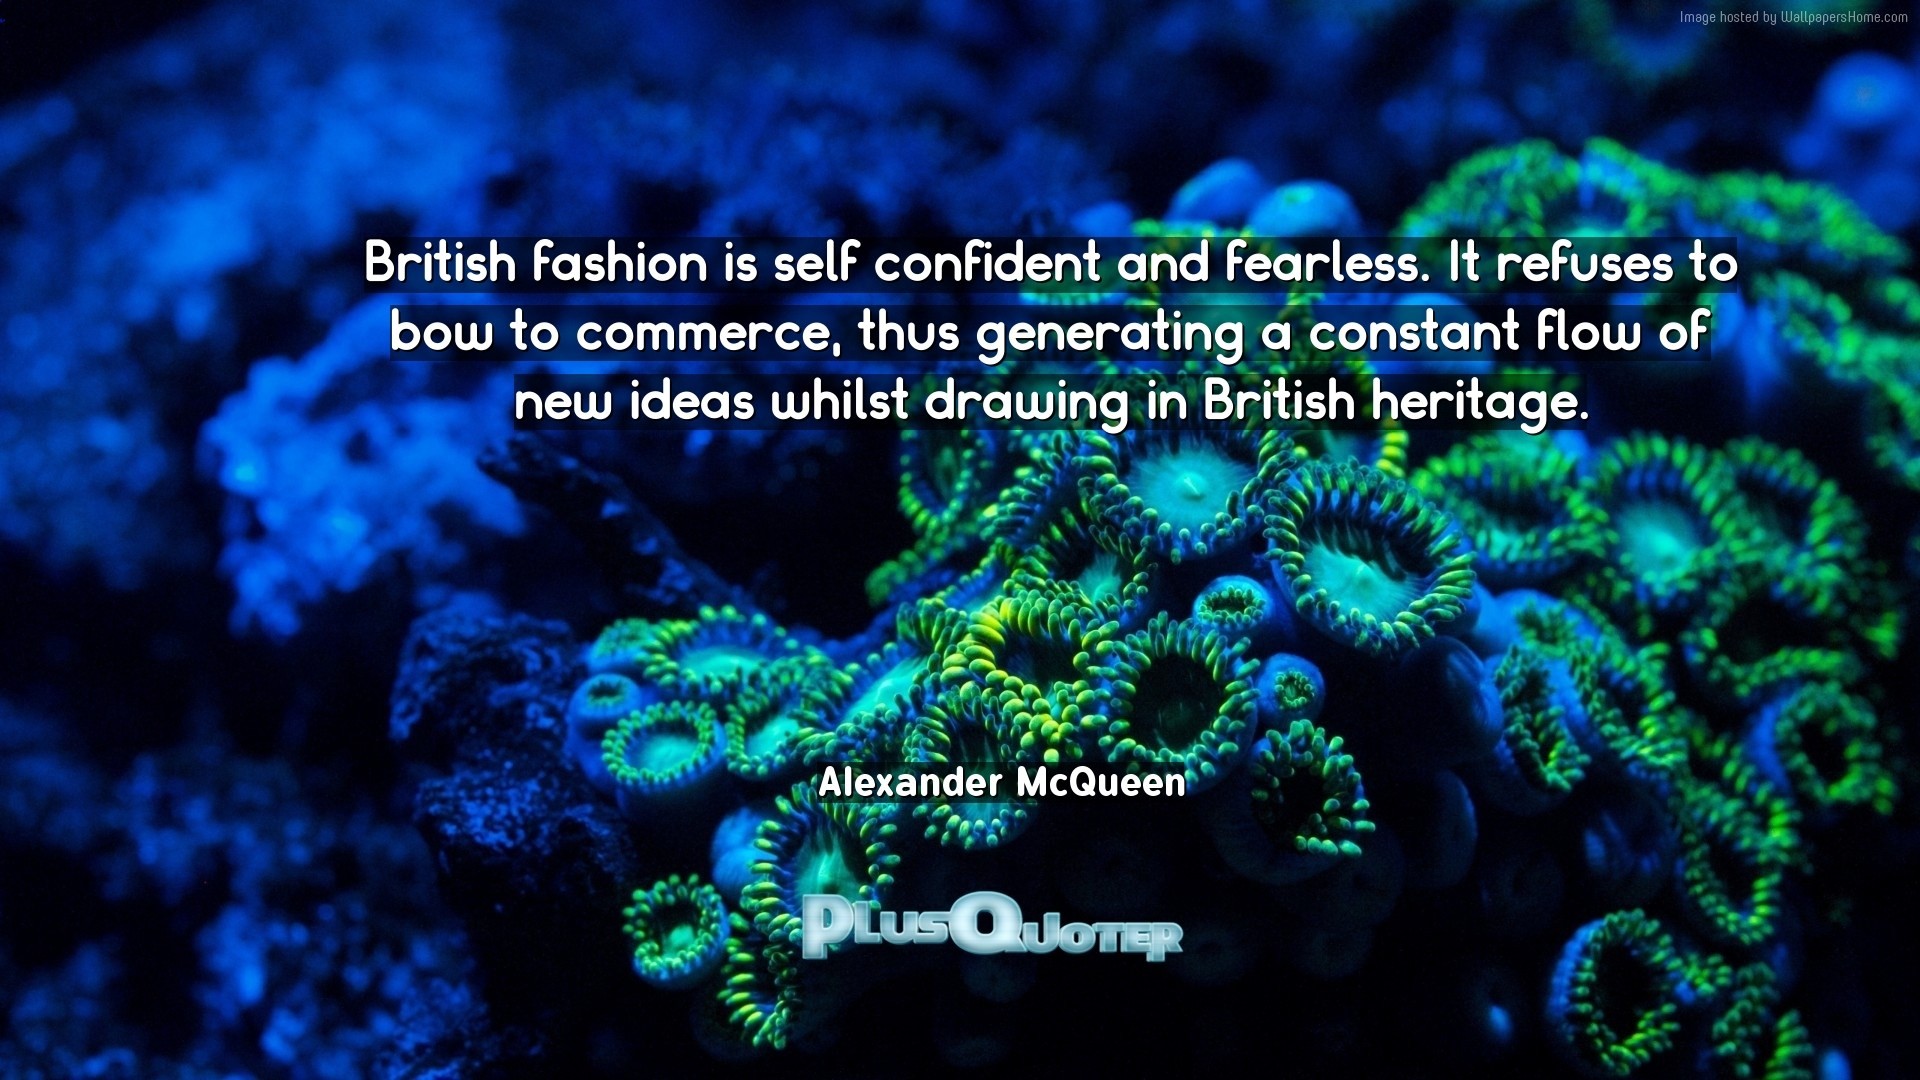 1920x1080 Download Wallpaper with inspirational Quotes- "British fashion is self  confident and fearless. It